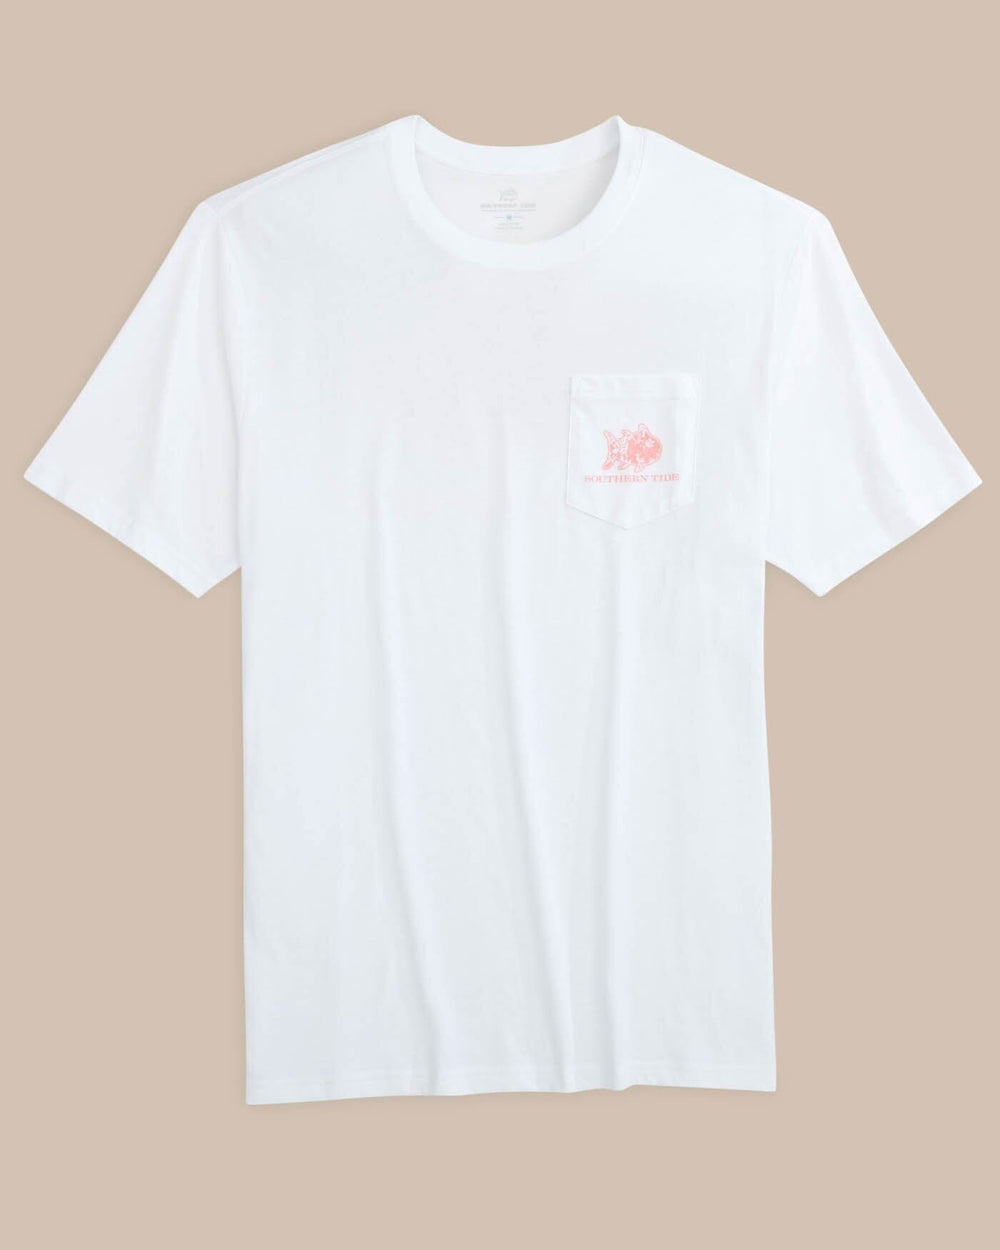 The front view of the Southern Tide Plumeria Short Sleeve T-Shirt by Southern Tide - Classic White